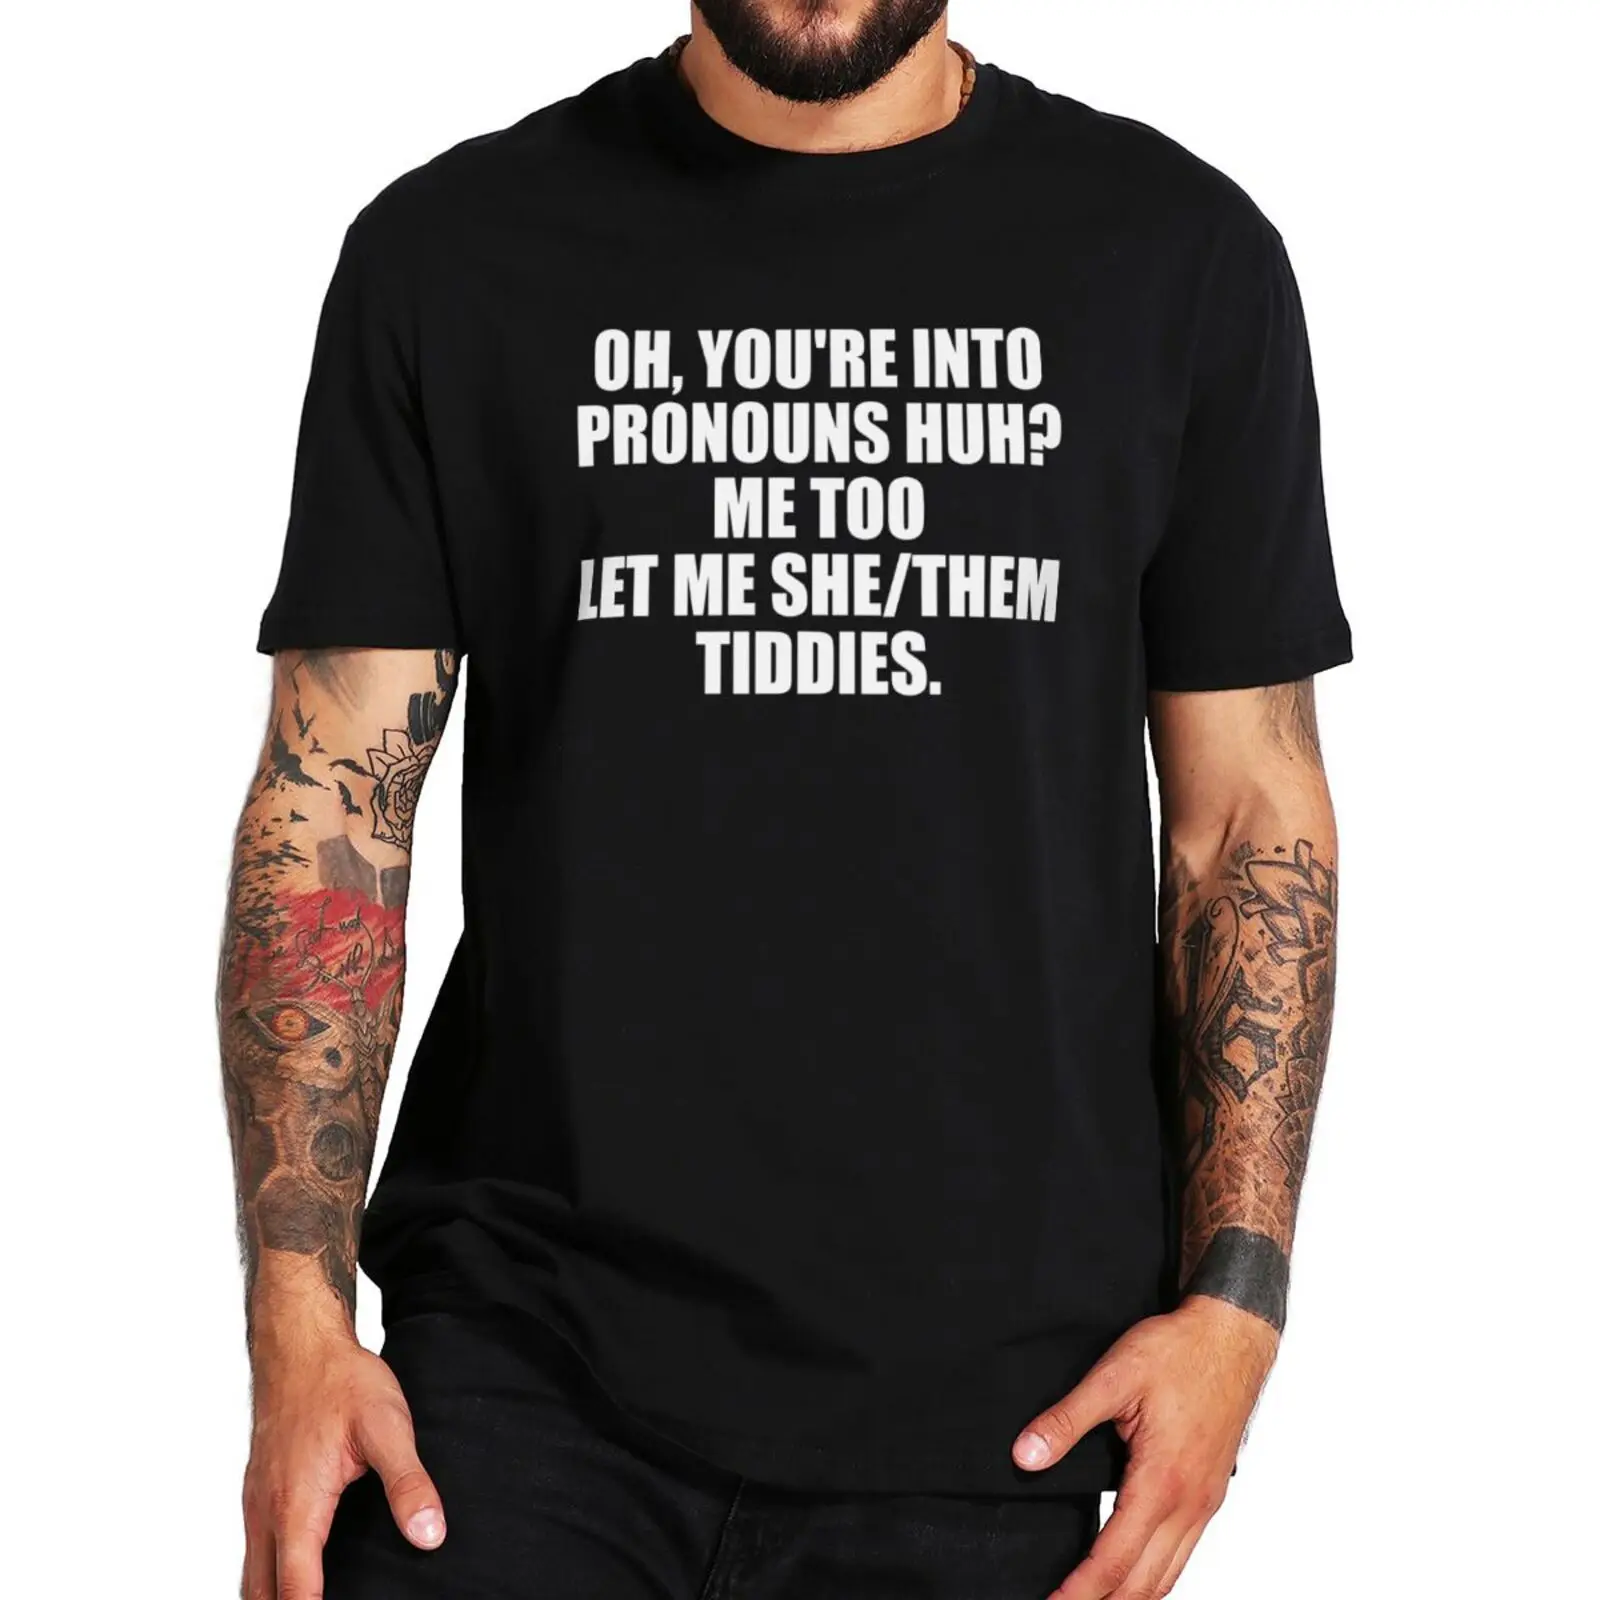 

Oh You're Into Pronouns Me Too Let Me She Them Tiddies T Shirt Funny Phrase Y2k Tee Tops 100% Cotton Soft Unisex T-shirts